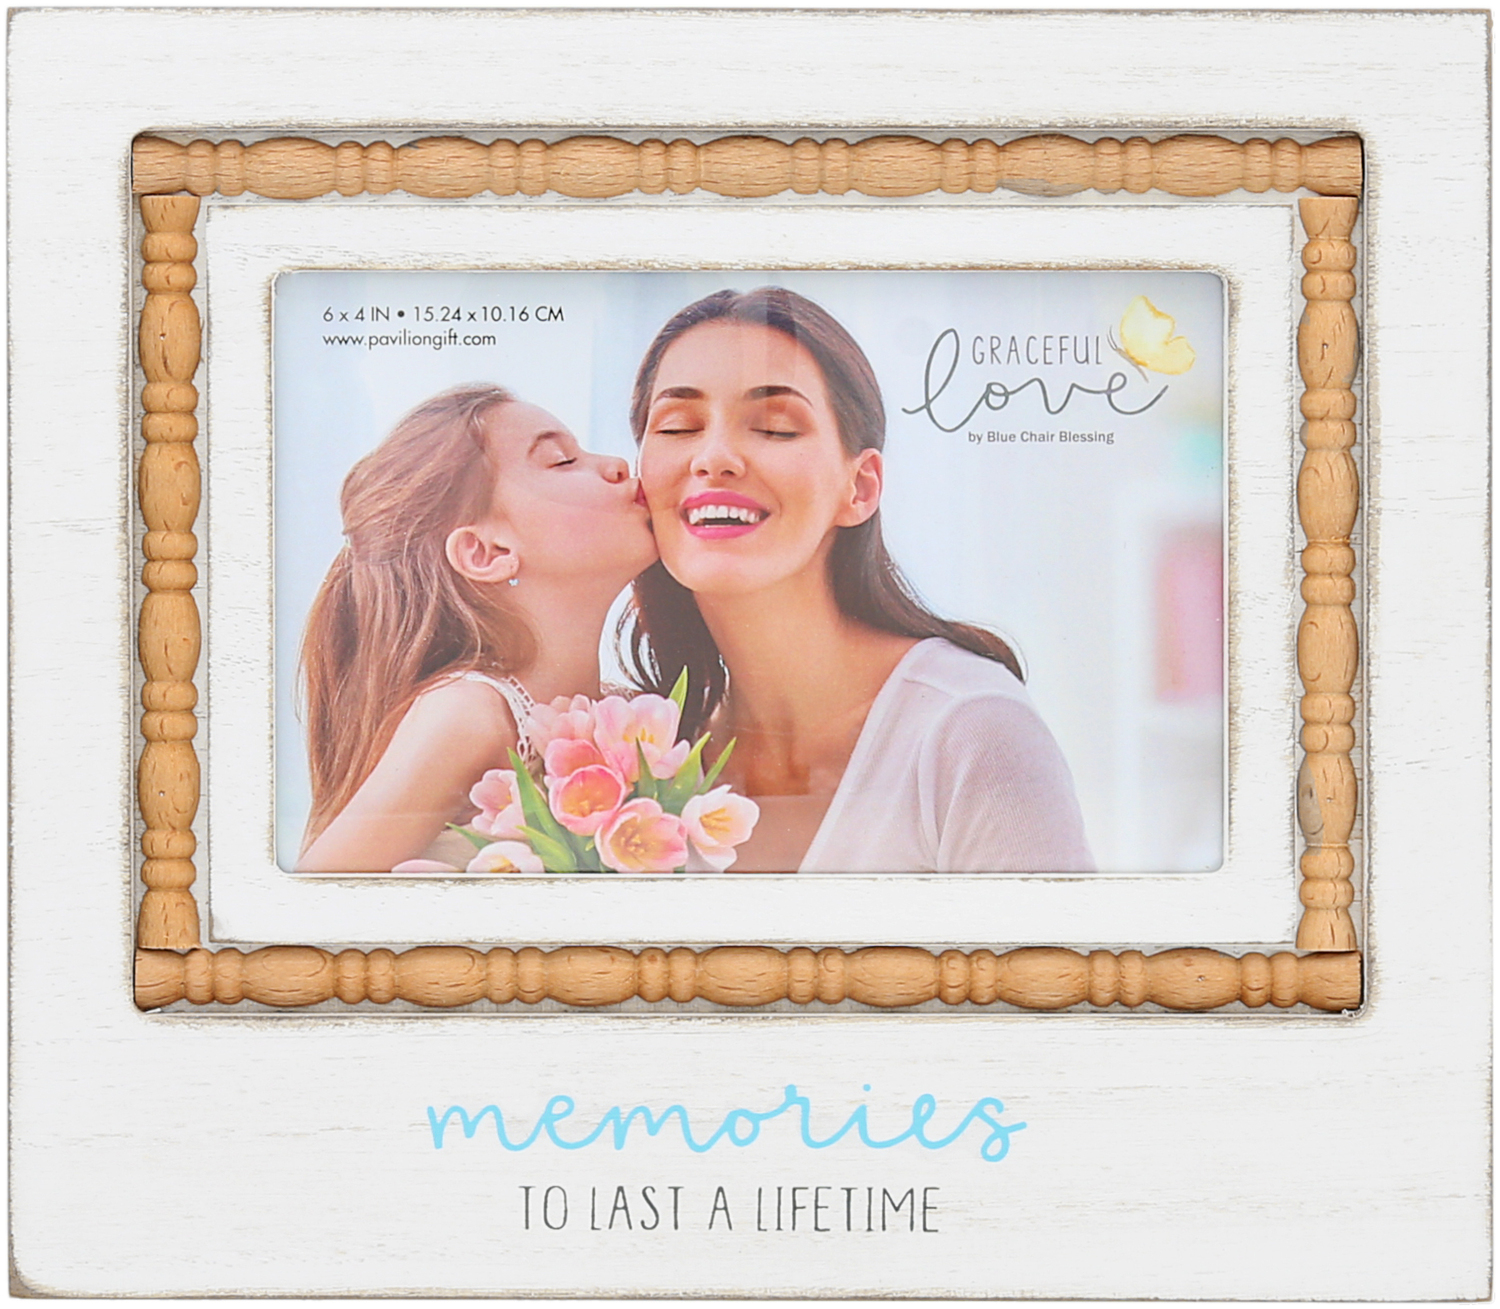 Memories by Graceful Love -BCB - Memories - 8.75" x 7.5" MDF Frame
(Holds 6" x 4" Photo)